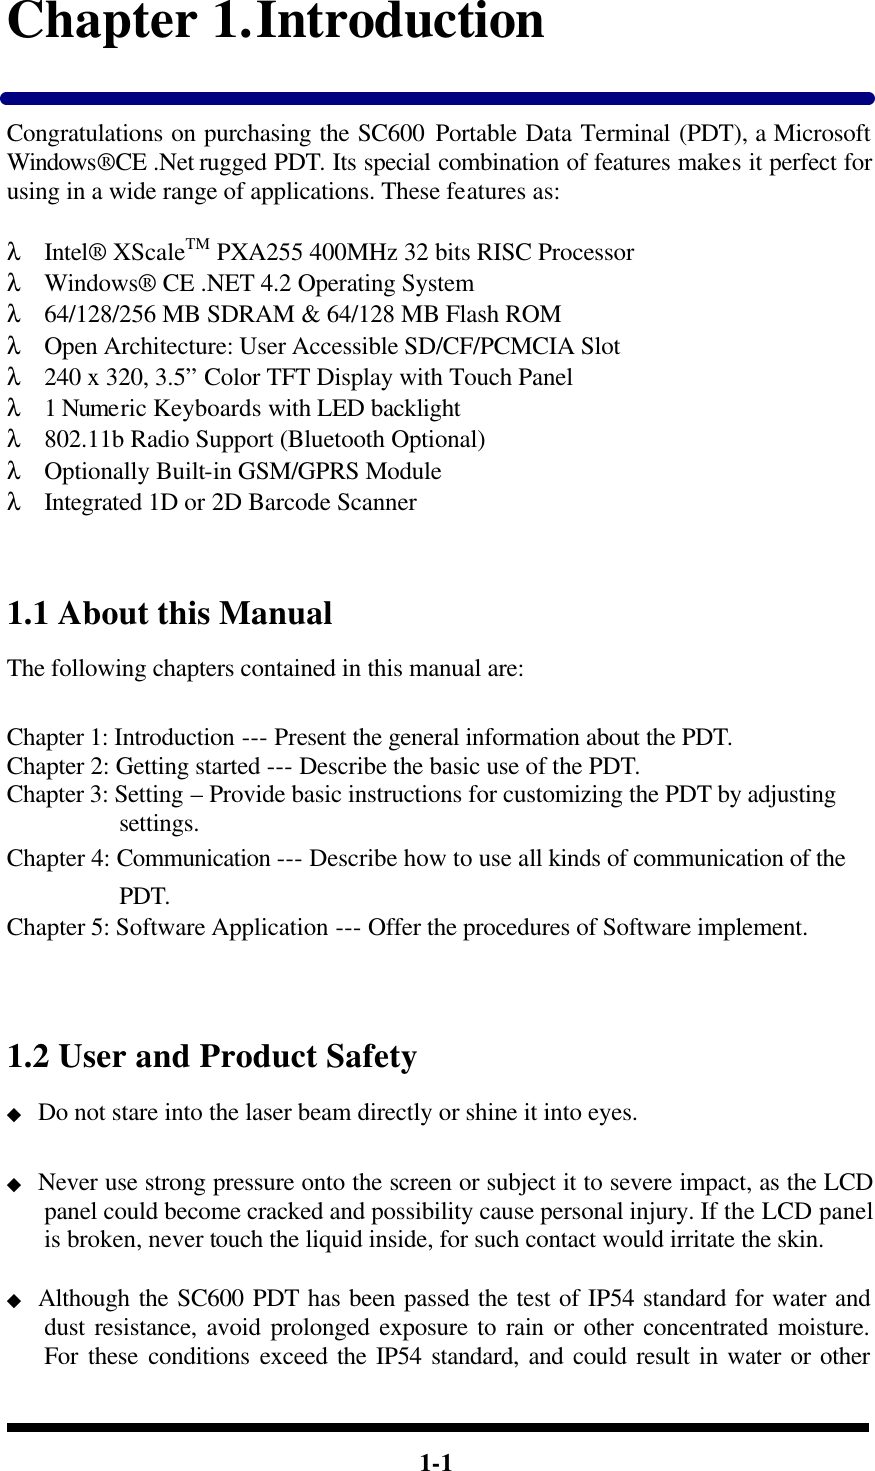  1-1 Chapter 1. Introduction  Congratulations on purchasing the SC600 Portable Data Terminal (PDT), a Microsoft Windows®CE .Net rugged PDT. Its special combination of features makes it perfect for using in a wide range of applications. These features as:    λ Intel® XScaleTM PXA255 400MHz 32 bits RISC Processor λ Windows® CE .NET 4.2 Operating System λ 64/128/256 MB SDRAM &amp; 64/128 MB Flash ROM λ Open Architecture: User Accessible SD/CF/PCMCIA Slot λ 240 x 320, 3.5” Color TFT Display with Touch Panel λ 1 Numeric Keyboards with LED backlight λ 802.11b Radio Support (Bluetooth Optional) λ Optionally Built-in GSM/GPRS Module λ Integrated 1D or 2D Barcode Scanner   1.1 About this Manual The following chapters contained in this manual are:  Chapter 1: Introduction --- Present the general information about the PDT. Chapter 2: Getting started --- Describe the basic use of the PDT. Chapter 3: Setting – Provide basic instructions for customizing the PDT by adjusting settings. Chapter 4: Communication --- Describe how to use all kinds of communication of the PDT. Chapter 5: Software Application --- Offer the procedures of Software implement.   1.2 User and Product Safety ◆ Do not stare into the laser beam directly or shine it into eyes.  ◆ Never use strong pressure onto the screen or subject it to severe impact, as the LCD panel could become cracked and possibility cause personal injury. If the LCD panel is broken, never touch the liquid inside, for such contact would irritate the skin.  ◆ Although the SC600 PDT has been passed the test of IP54 standard for water and dust resistance, avoid prolonged exposure to rain or other concentrated moisture. For these conditions exceed the IP54 standard, and could result in water or other 